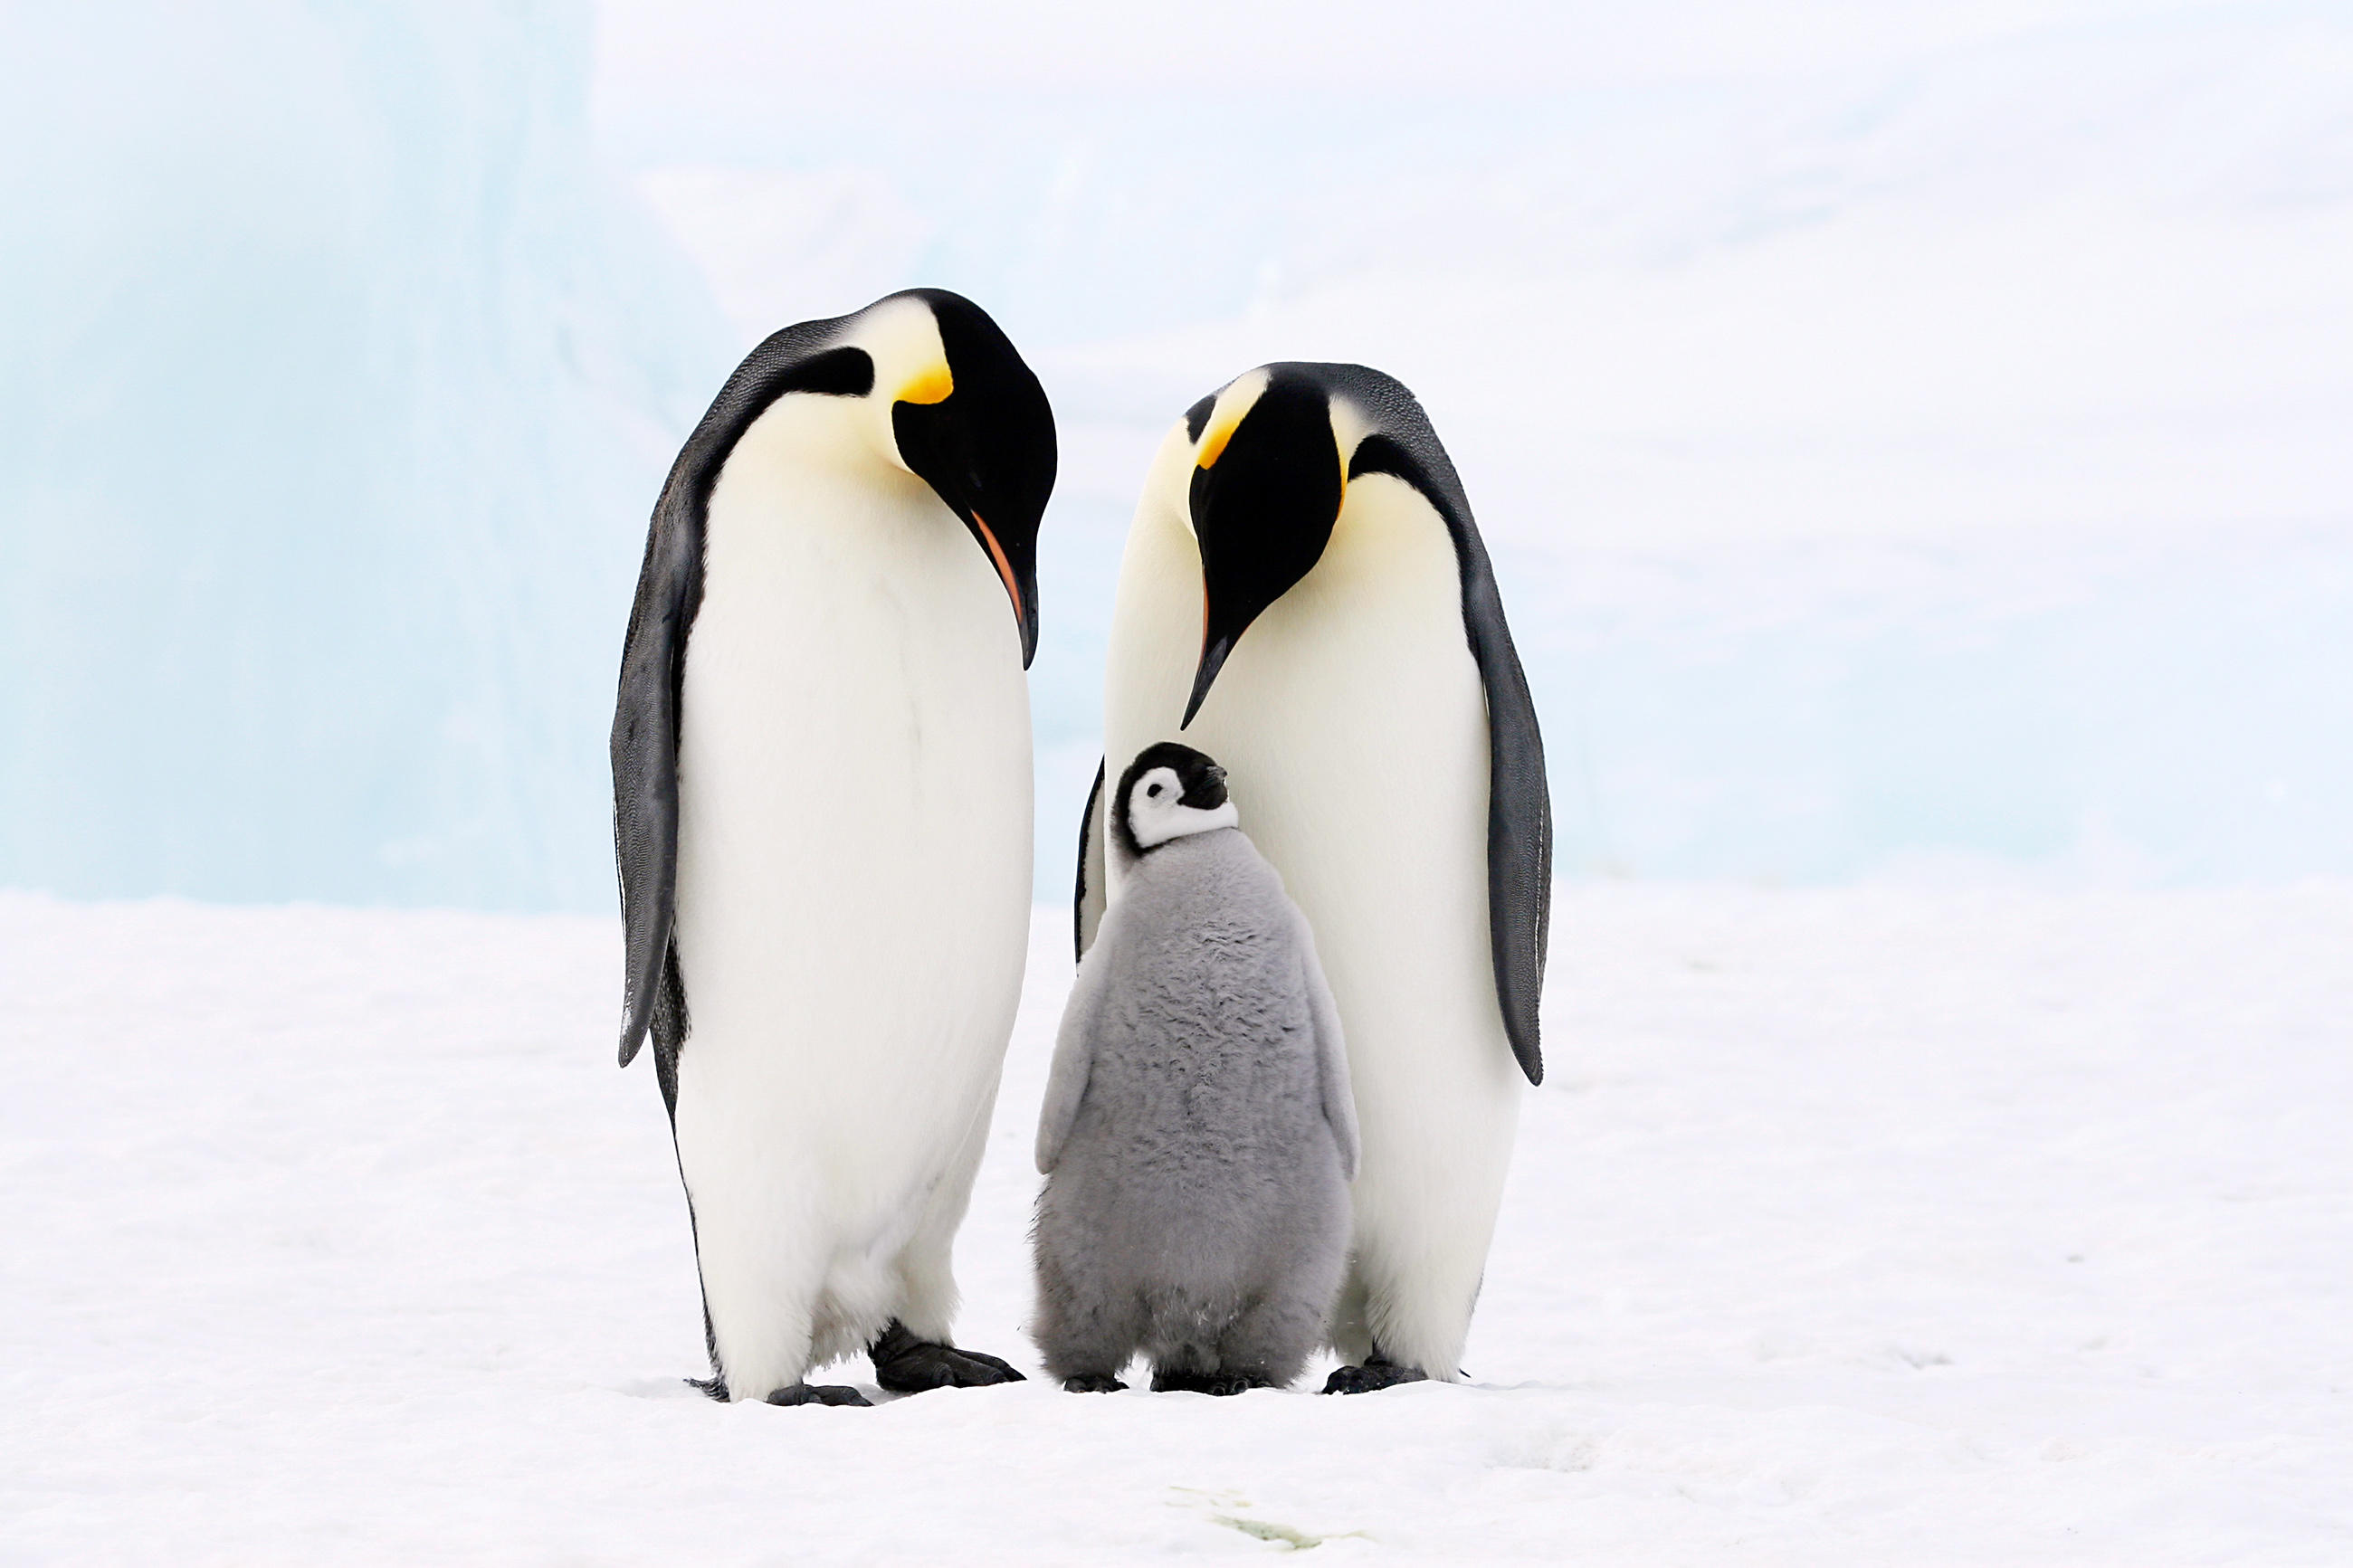 Penguin Images Full HDQ Penguin Pictures and Wallpapers Showcase